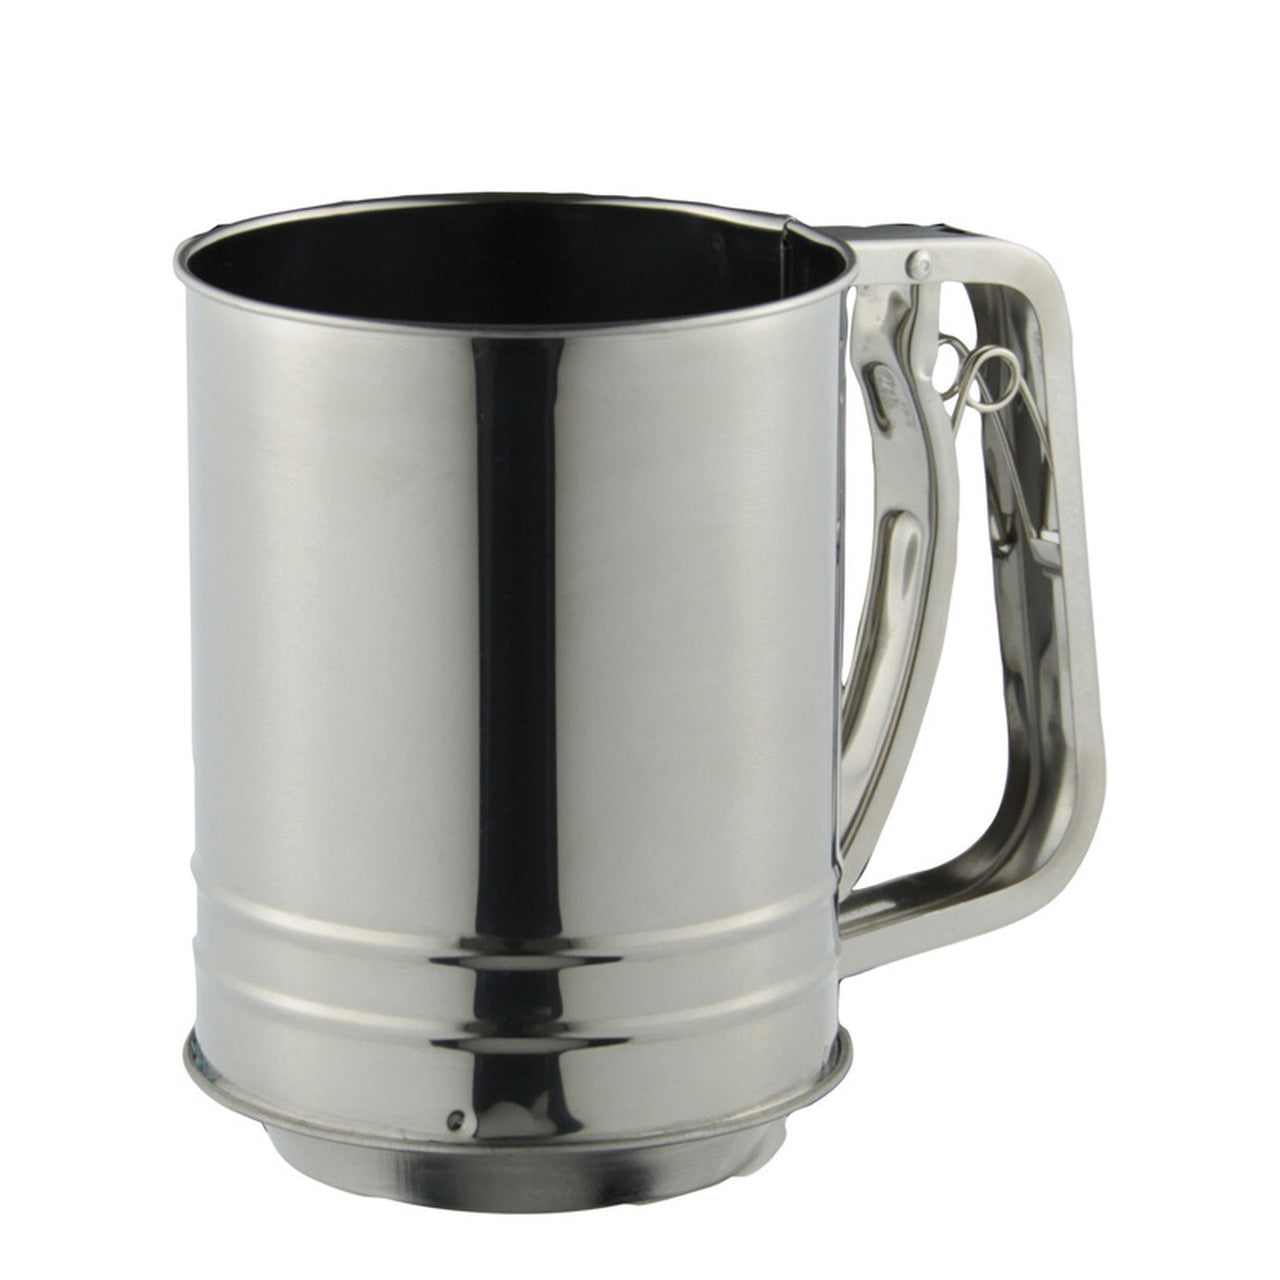 Flour Sifter 3 Cup S/S